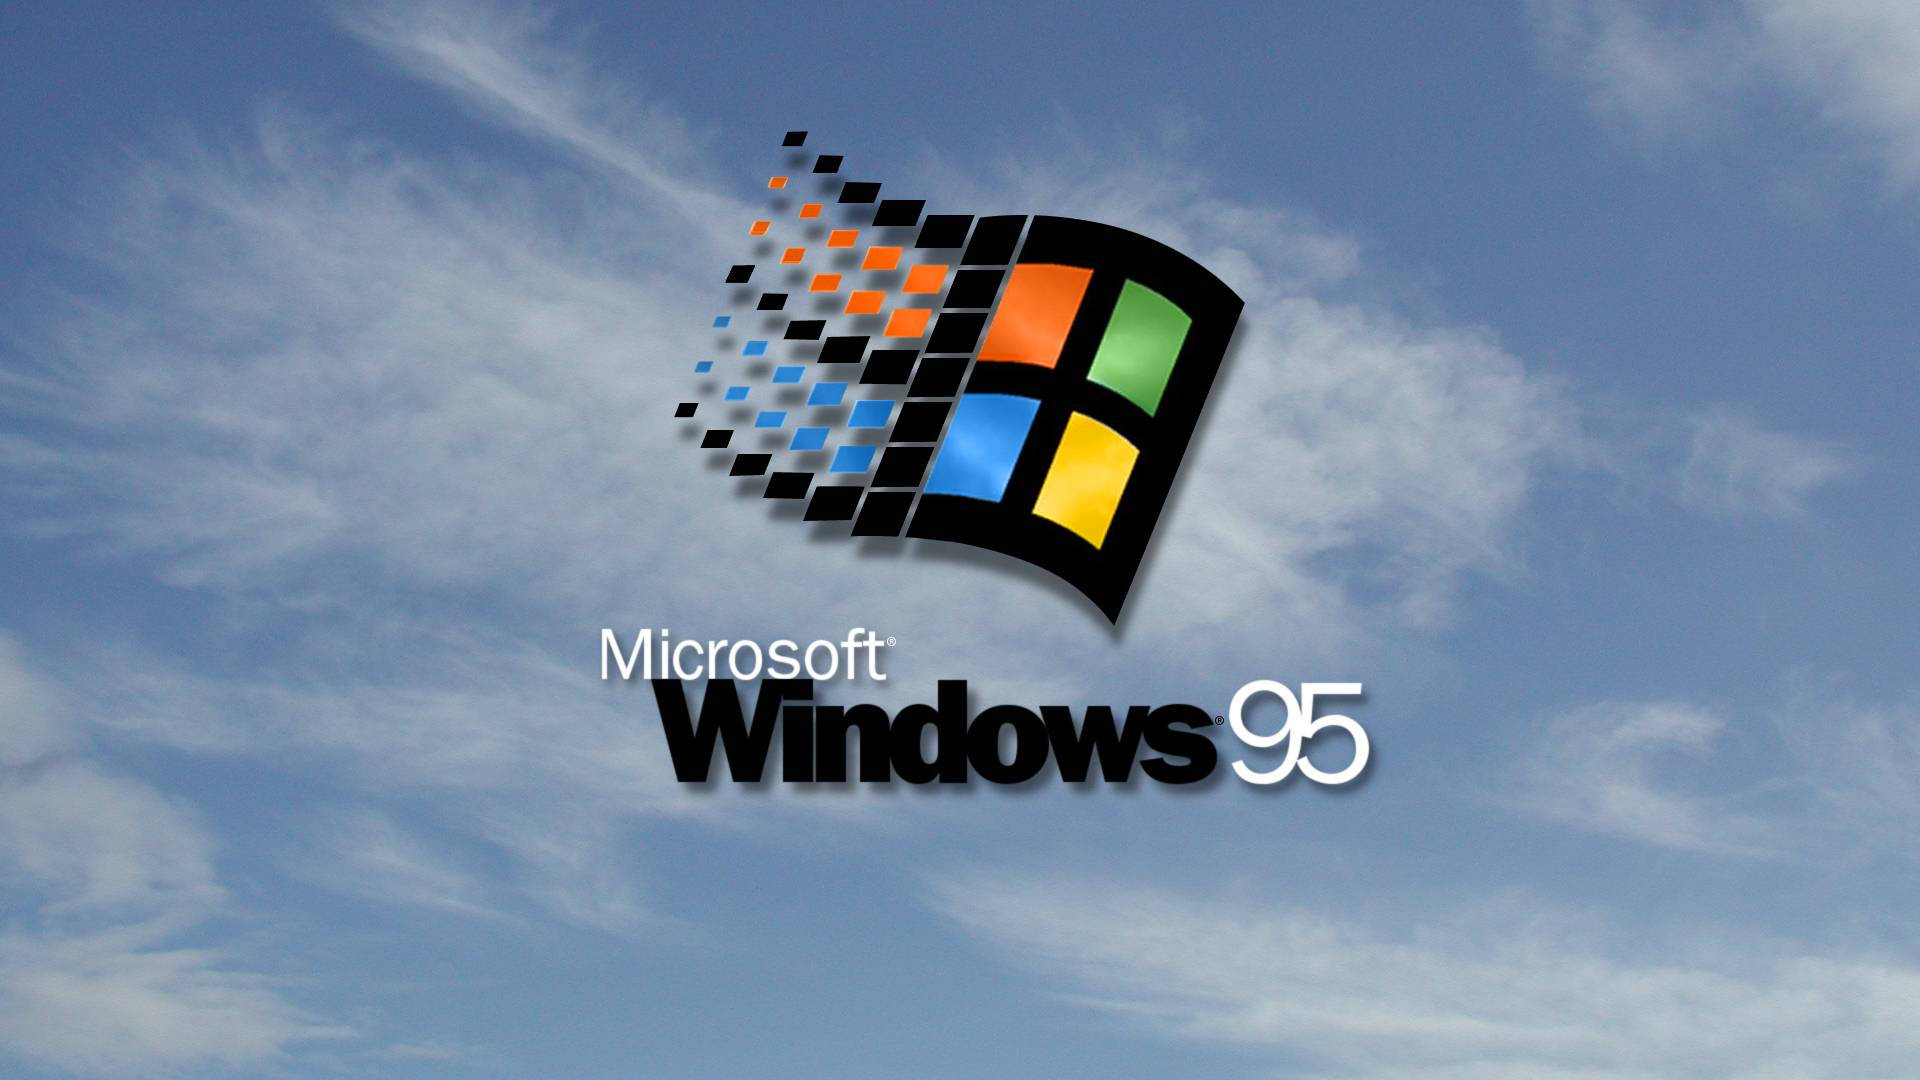 Remember the classic Windows 95 sky background And relive the memories